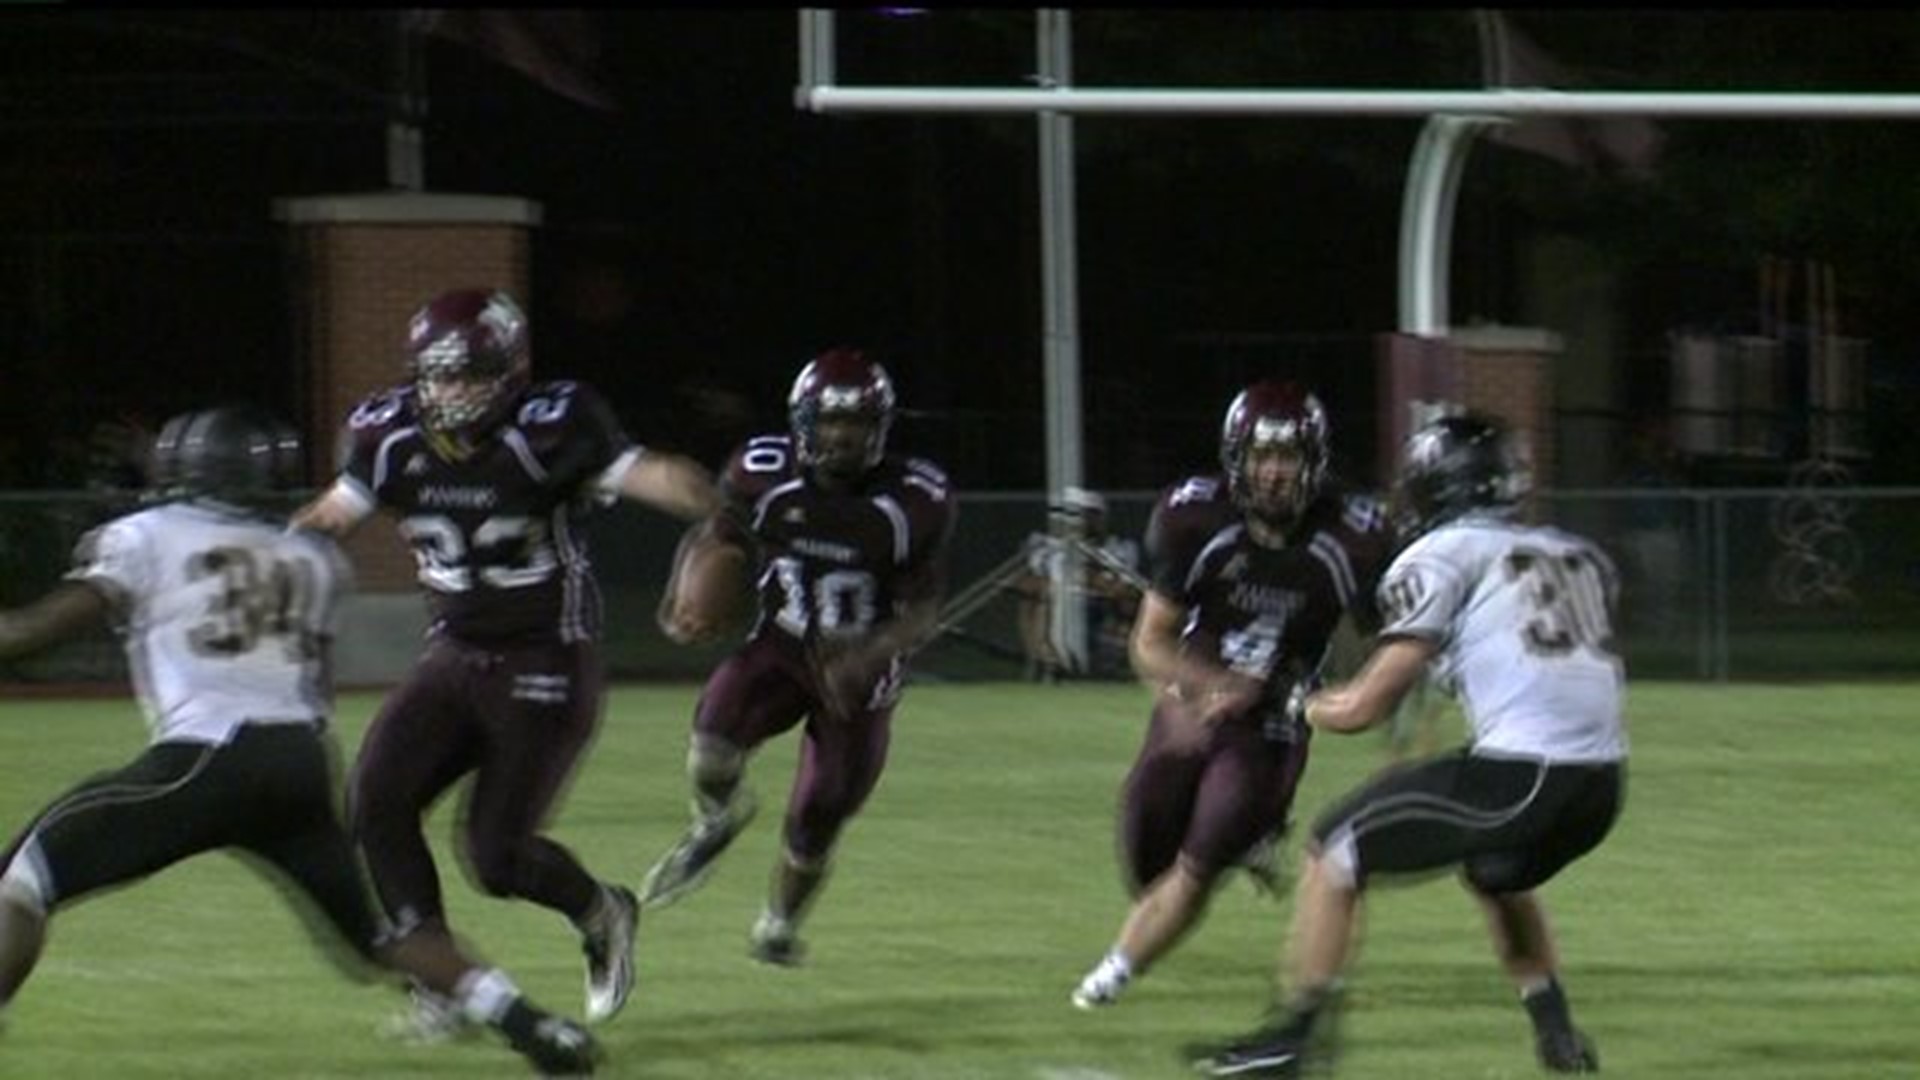 Galesburg Grabs Close Win Over Moline